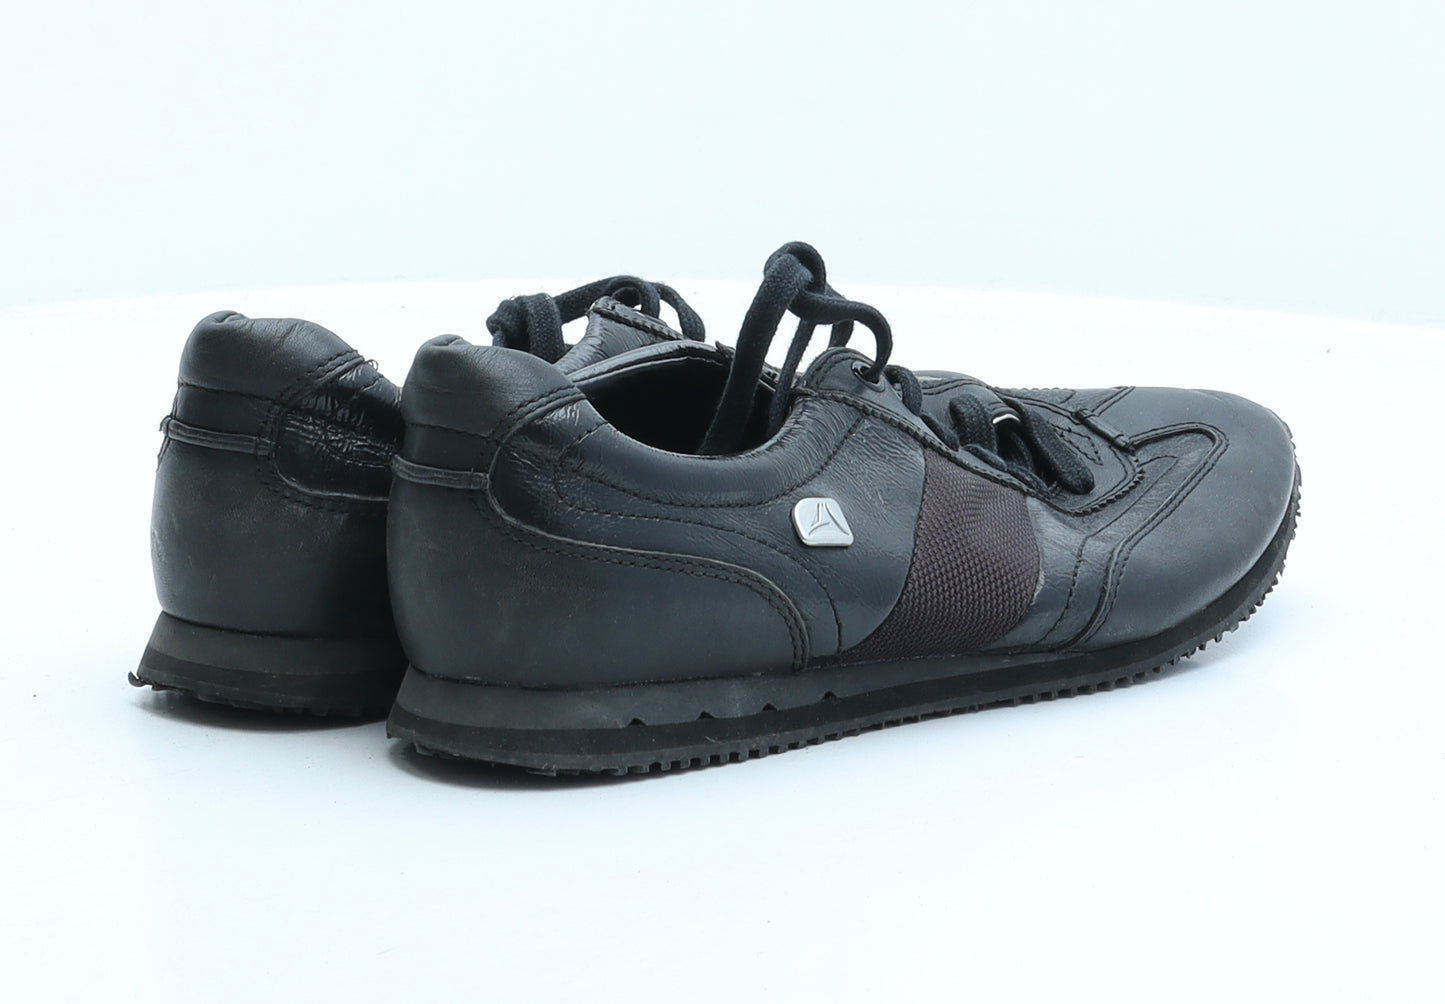 Clarks Womens Black Synthetic Trainer UK 5